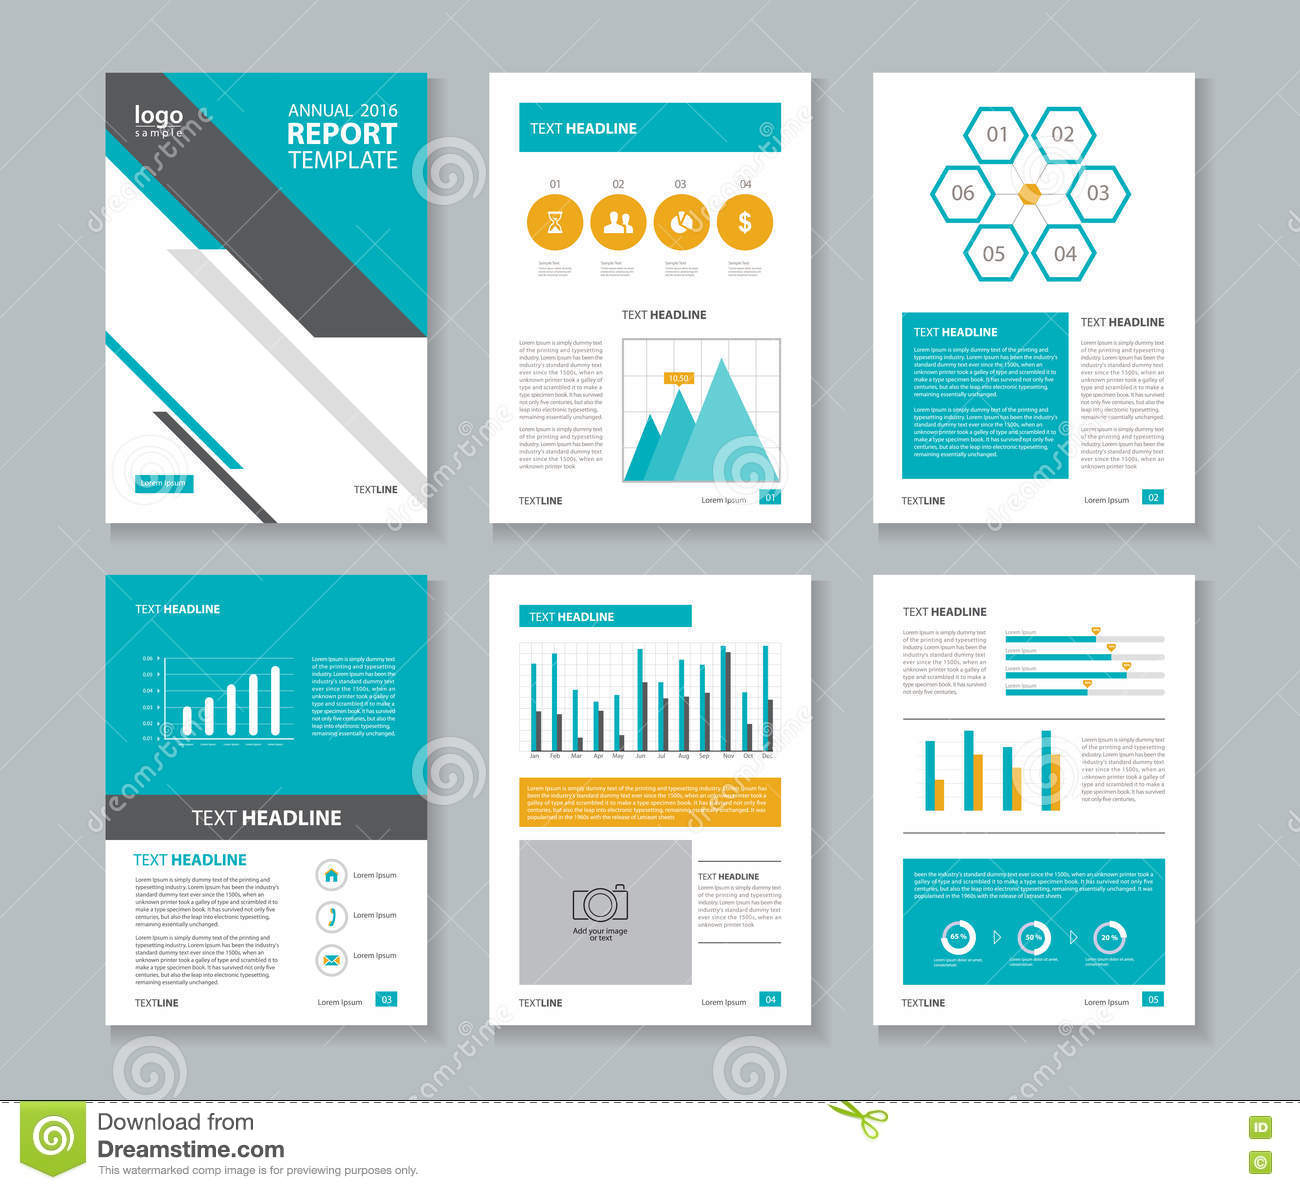 Templates For Annual Reports – All New Resume Examples In Word Annual Report Template